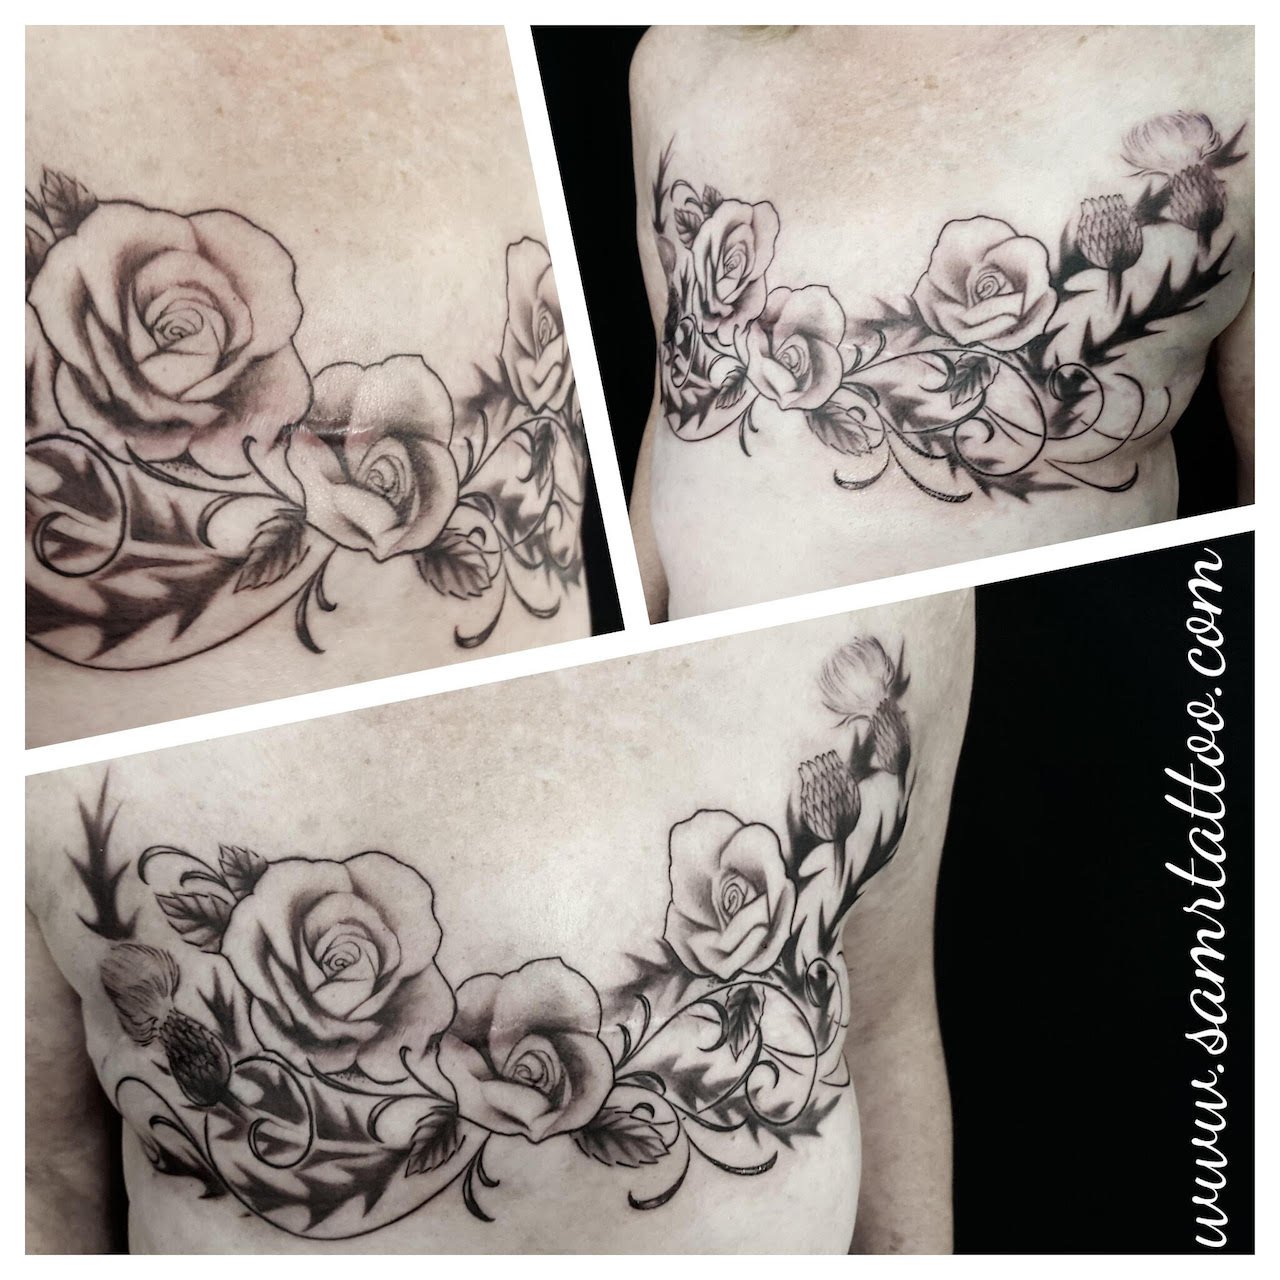 three different photos show various details of a black and grey tattoo on a woman's chest area covering mastectomy scars